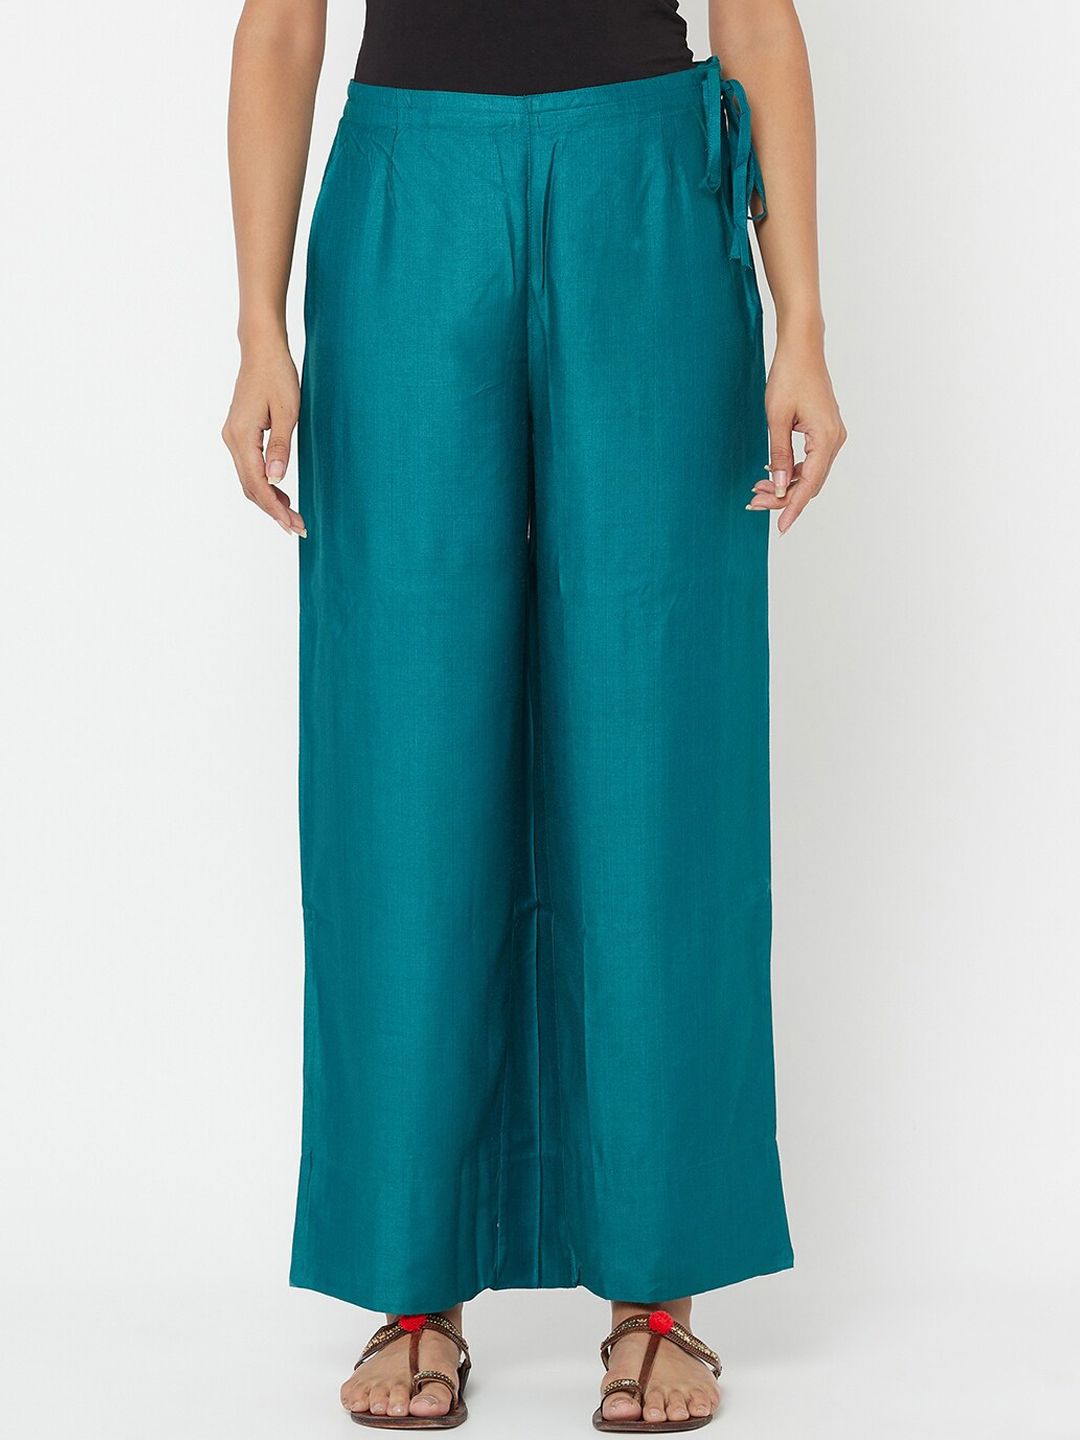 Fabindia Women Teal Green Pleated Parallel Trousers Price in India